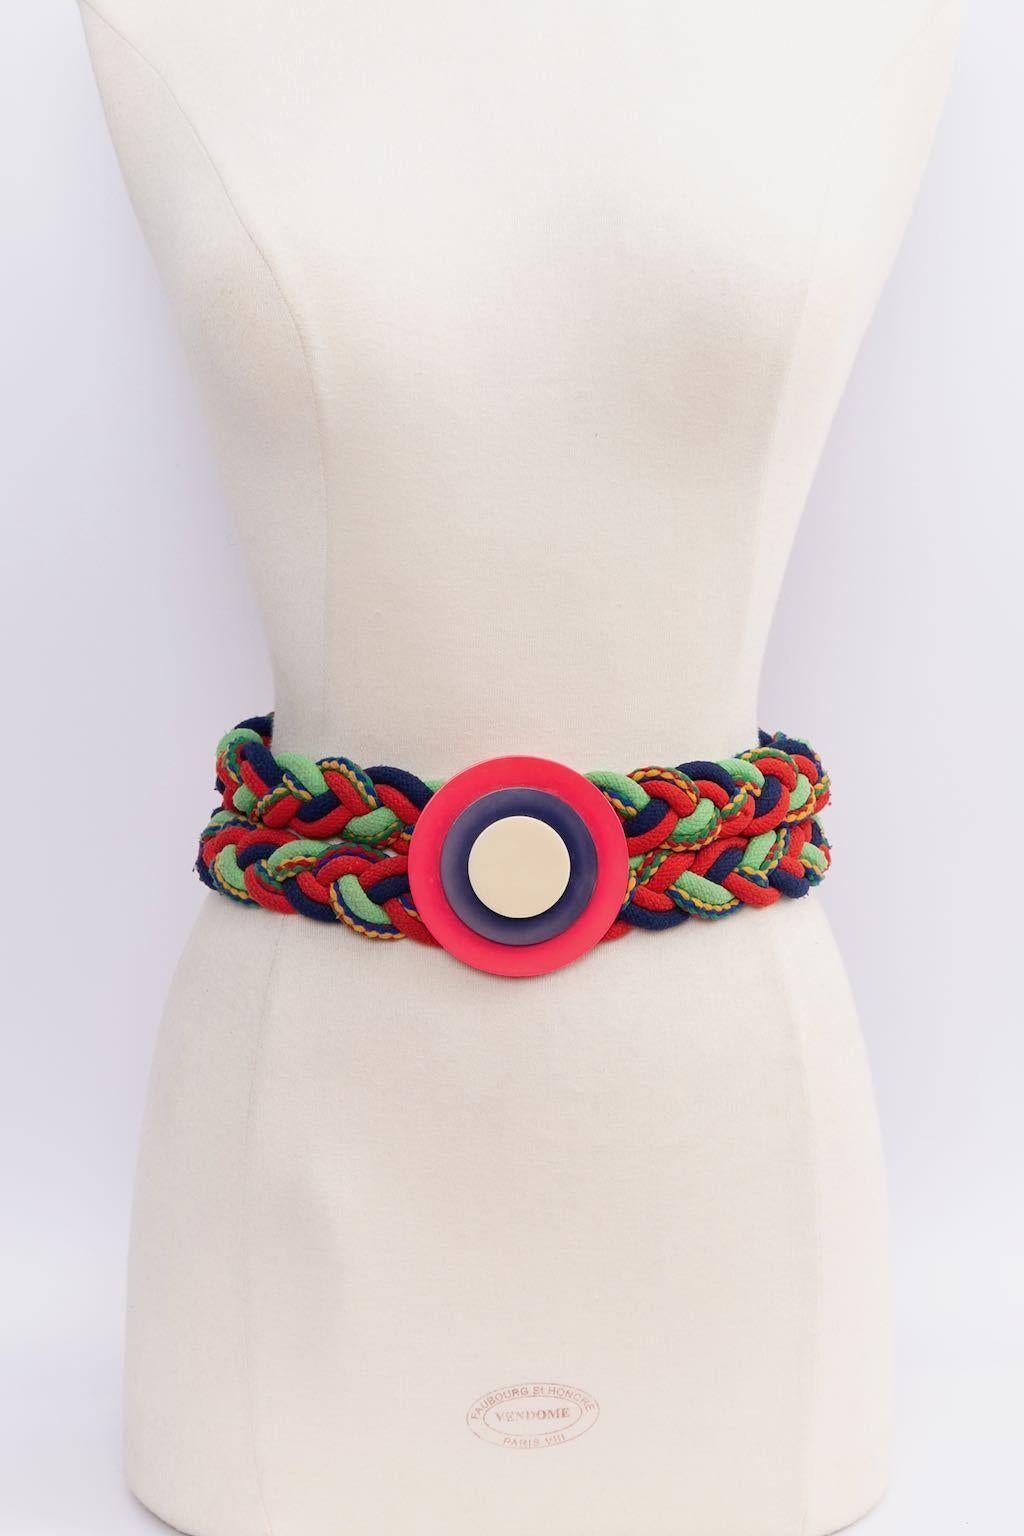 Yves Saint Laurent (Made in France) Multi-color stretchy belt with a bakelite buckle.

Additional information: 
Dimensions: Length: 59 cm (23.23